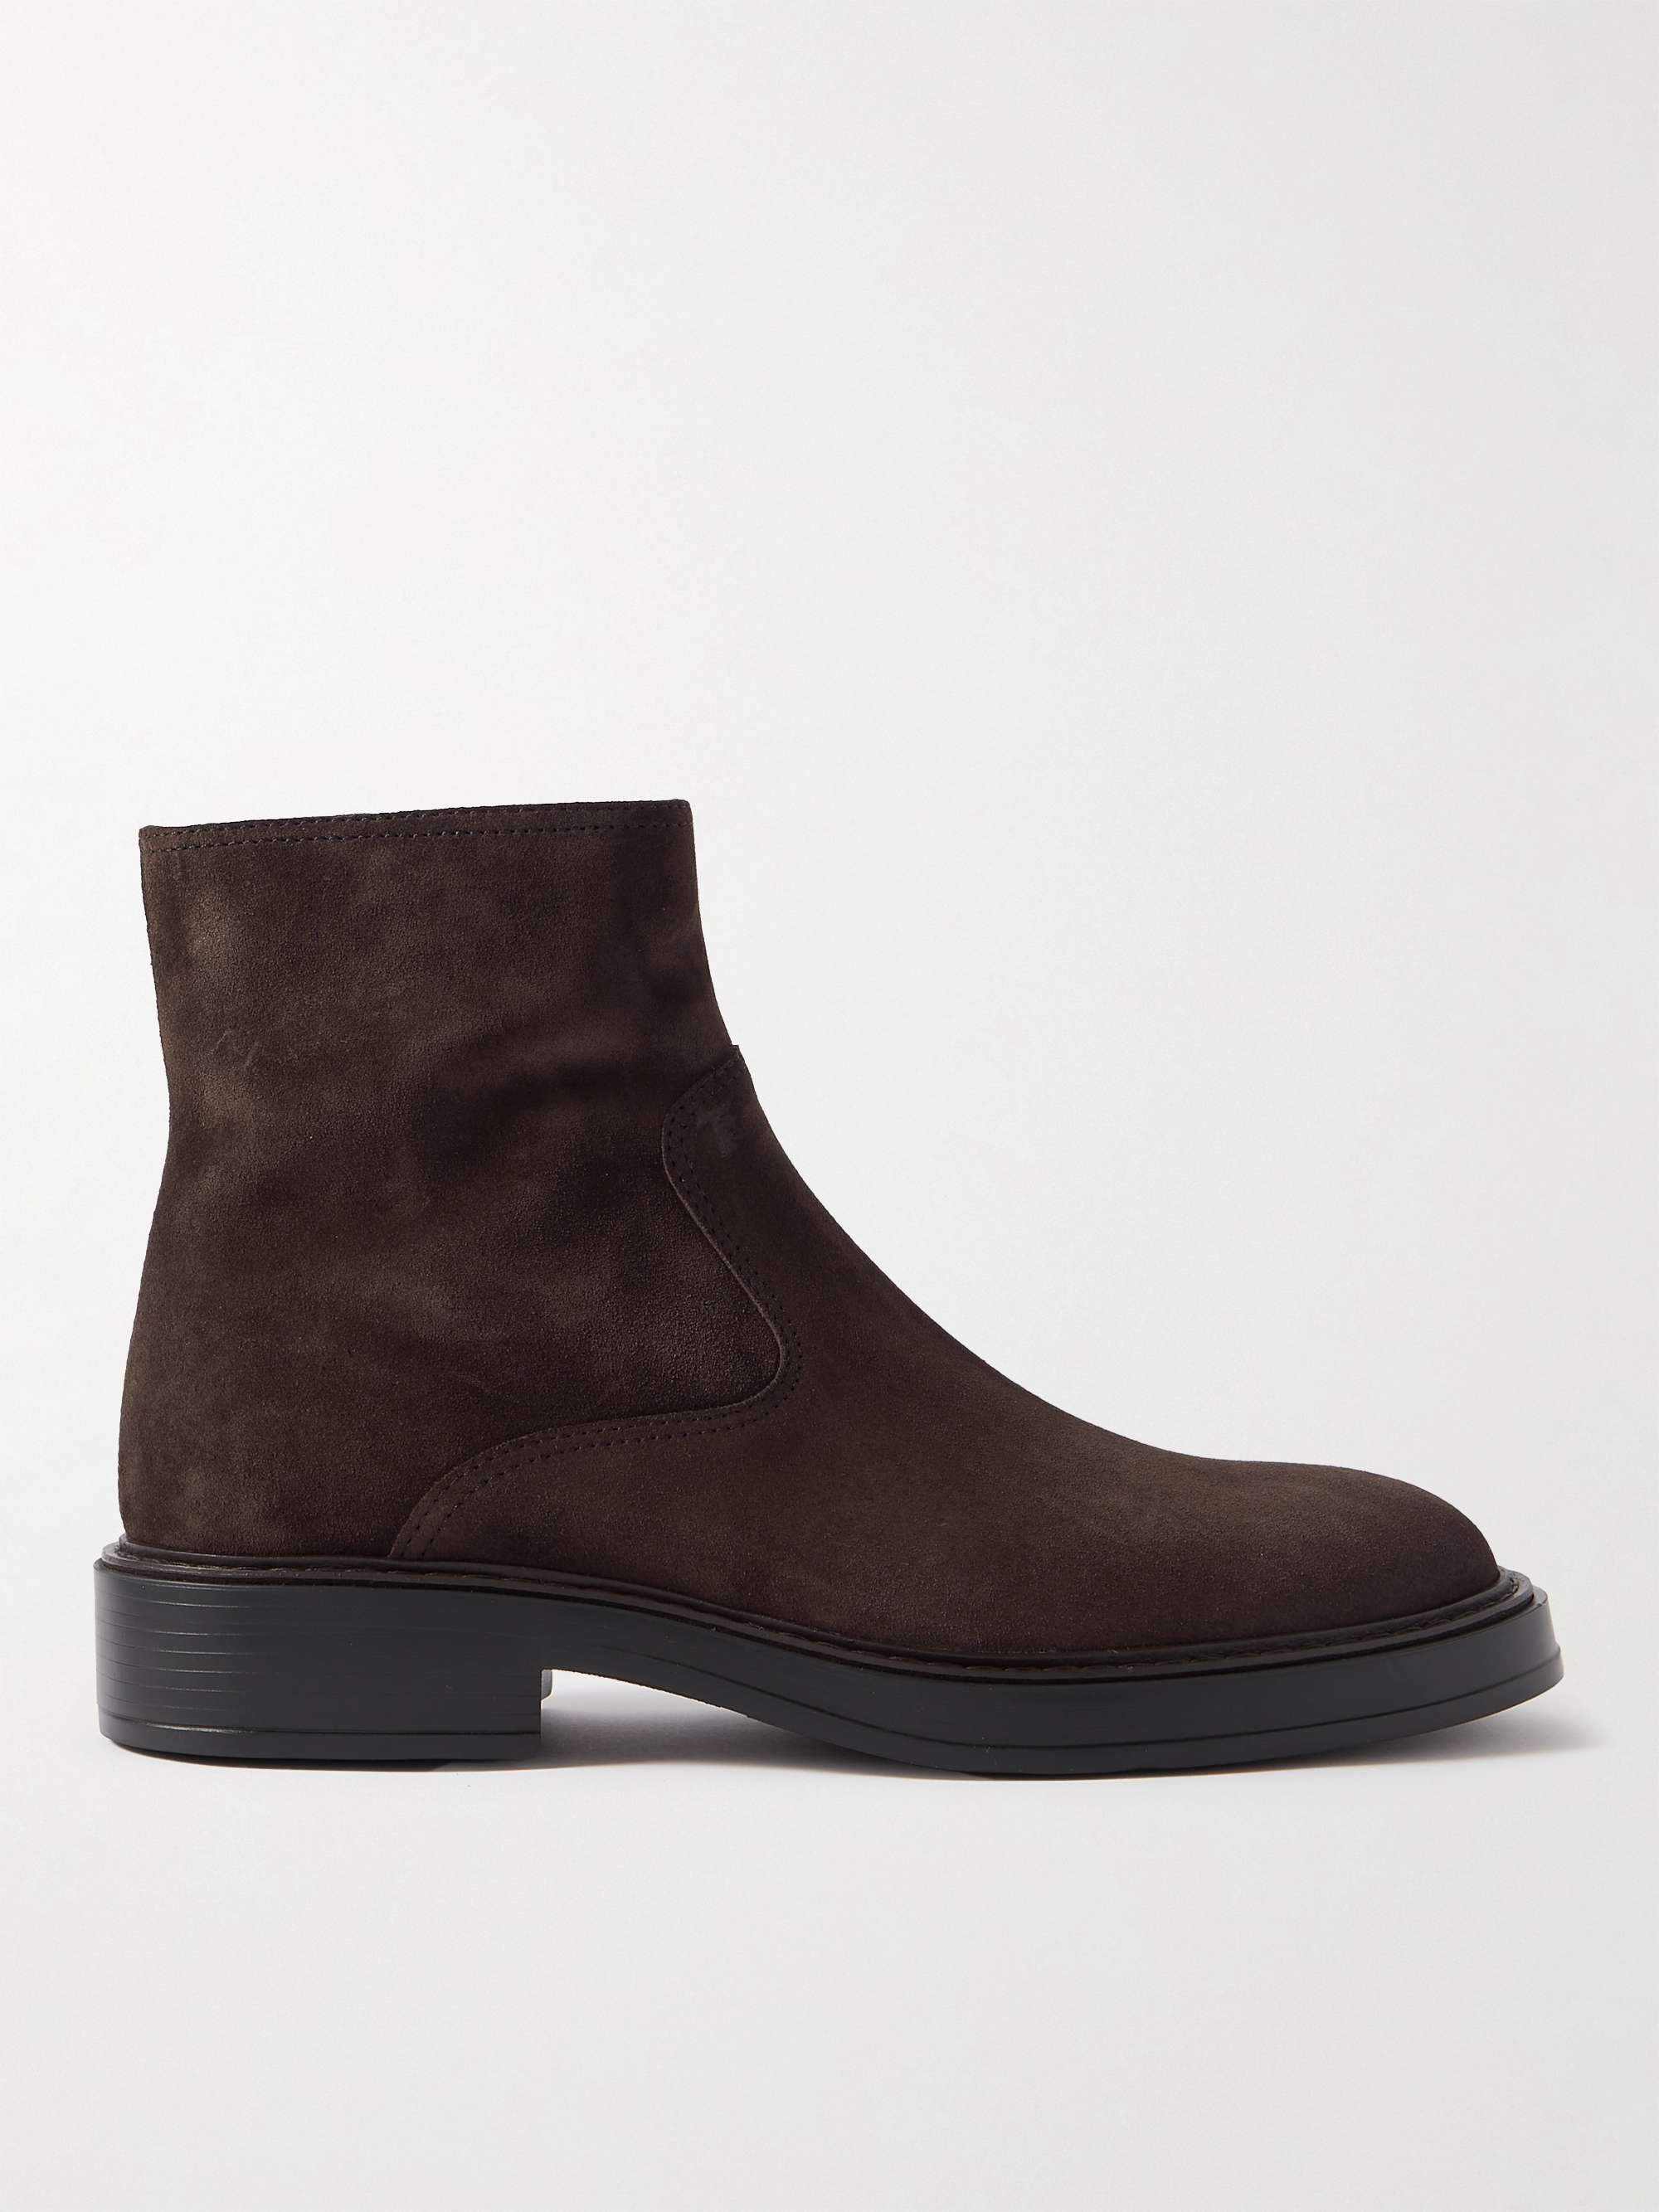 TOD'S Suede Chelsea Boots for Men | MR PORTER